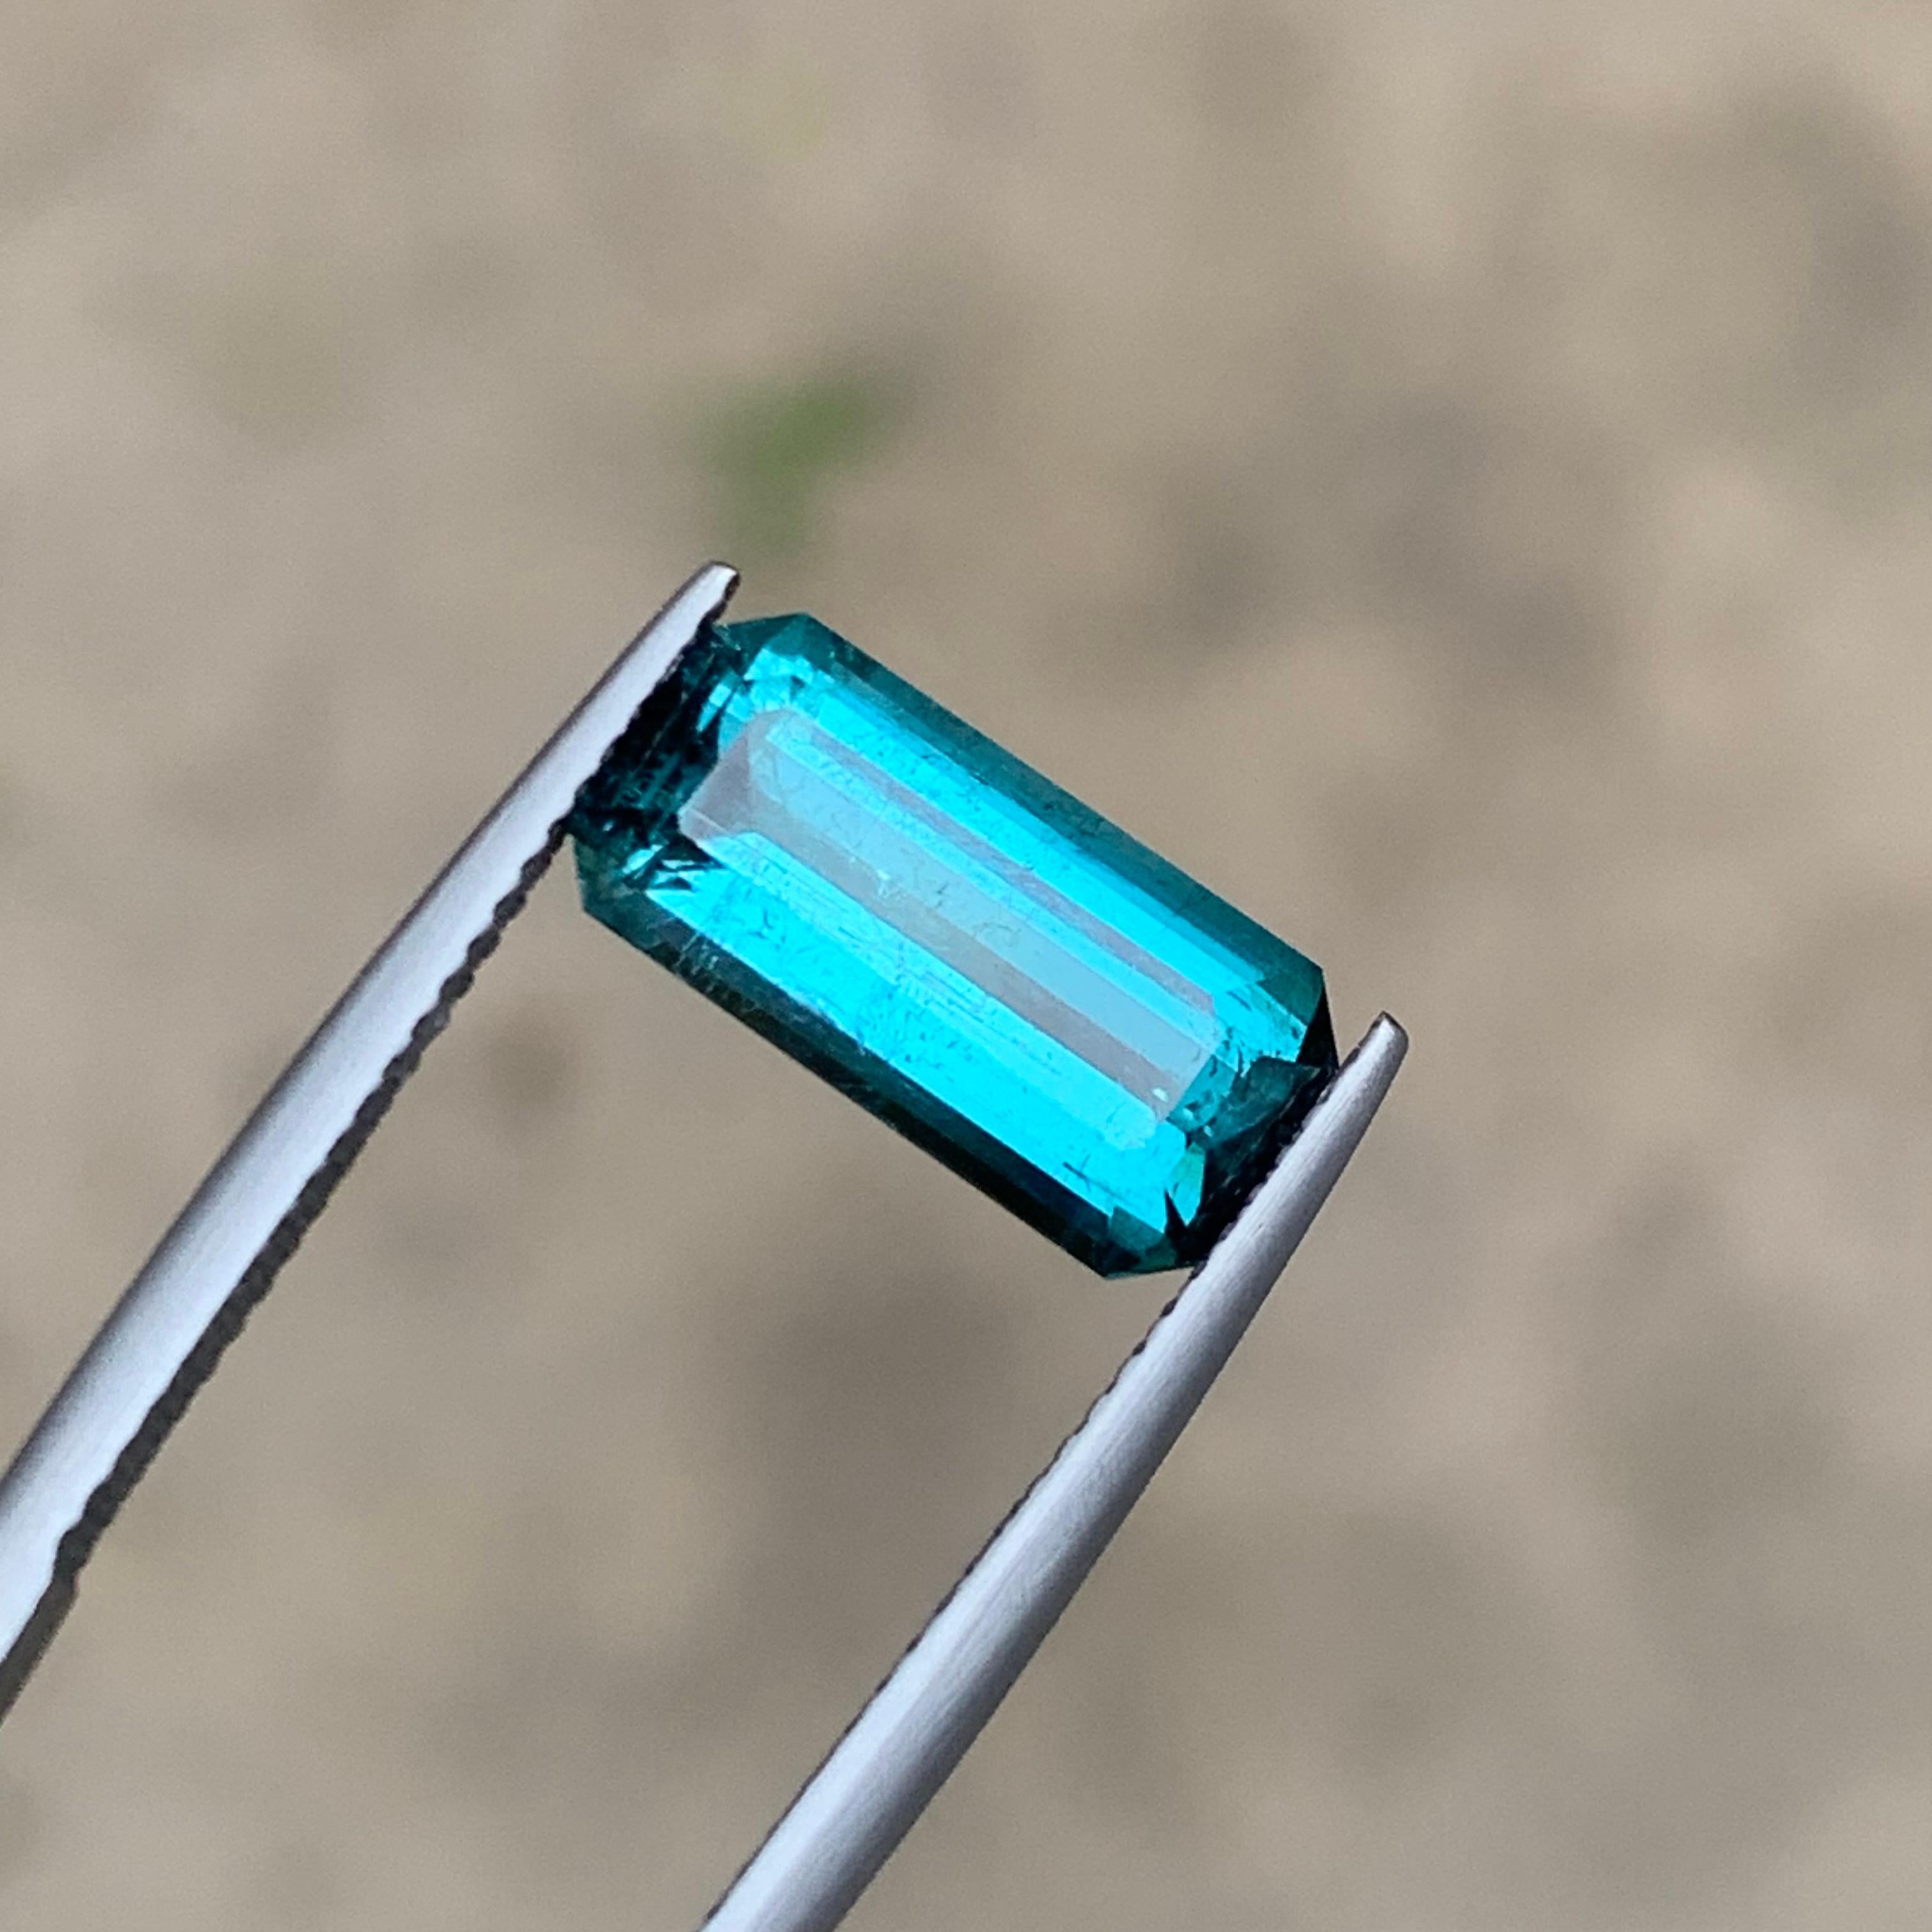 Rare Neon Blue Natural Tourmaline Gemstone, 4 Ct Emerald Cut for Ring/Jewelry AF For Sale 1